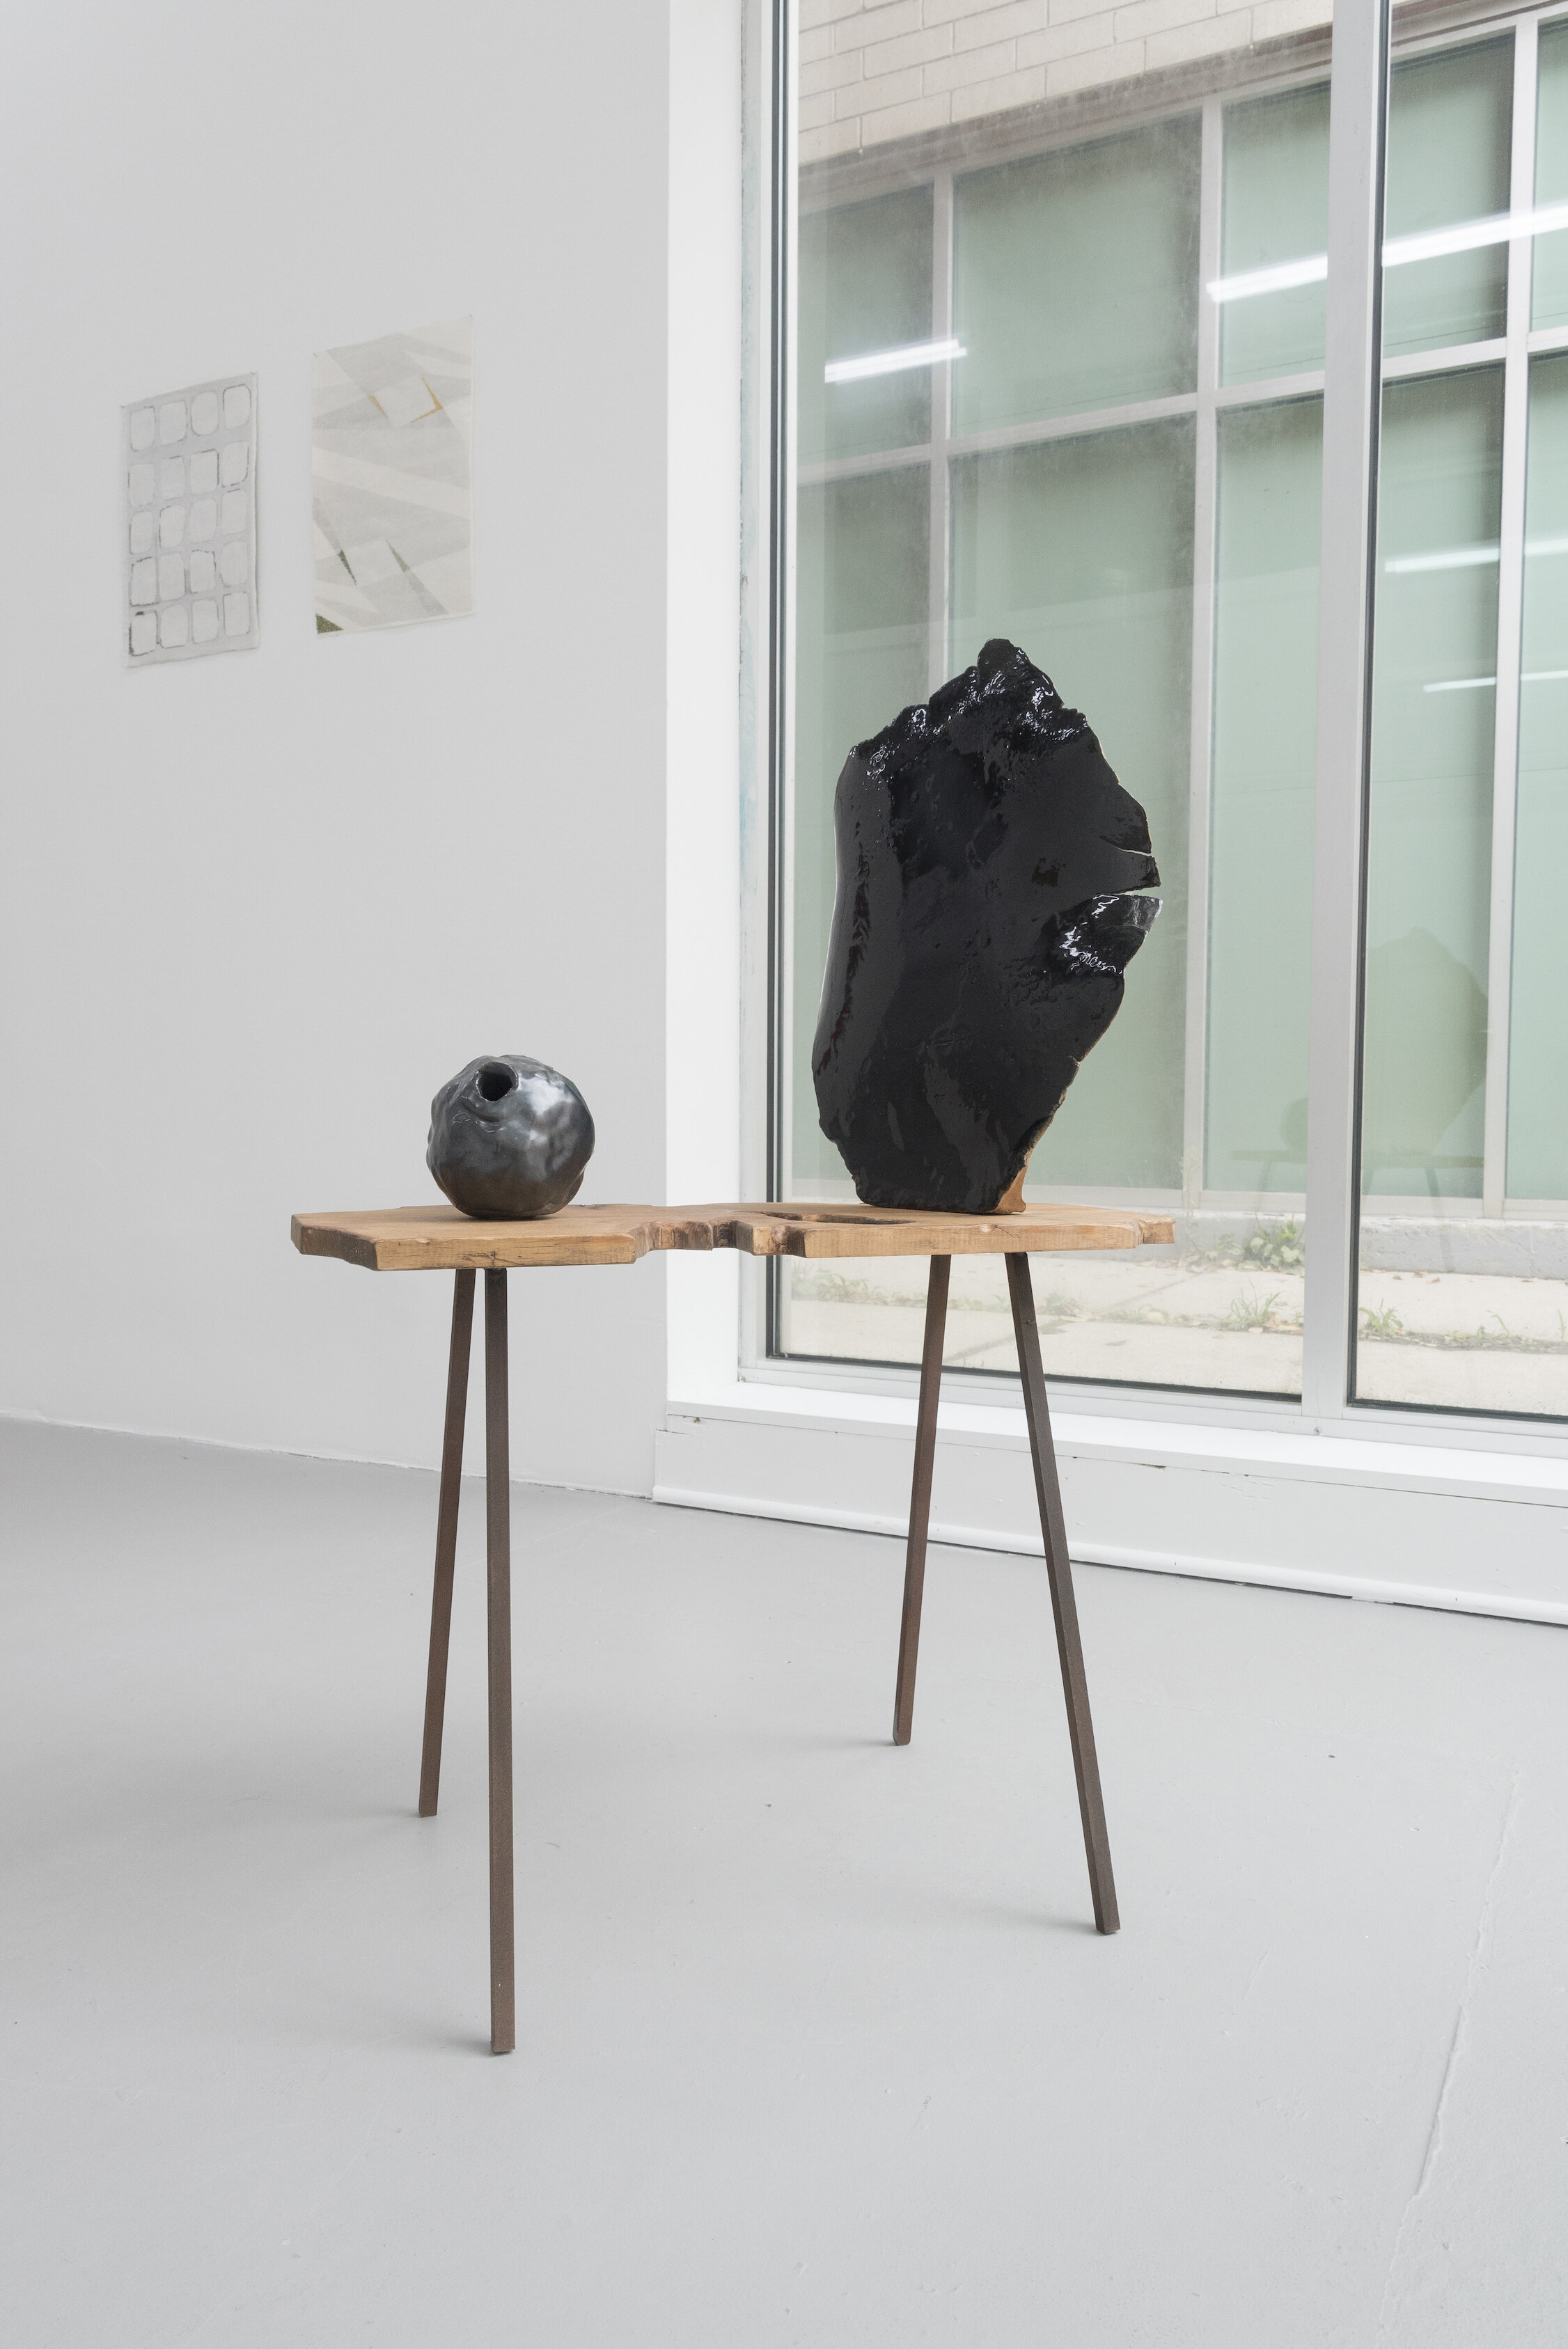  Soo Shin,  Gesture: Reflection and Weight , 2019, resin, glaze on stoneware, wood, steel 